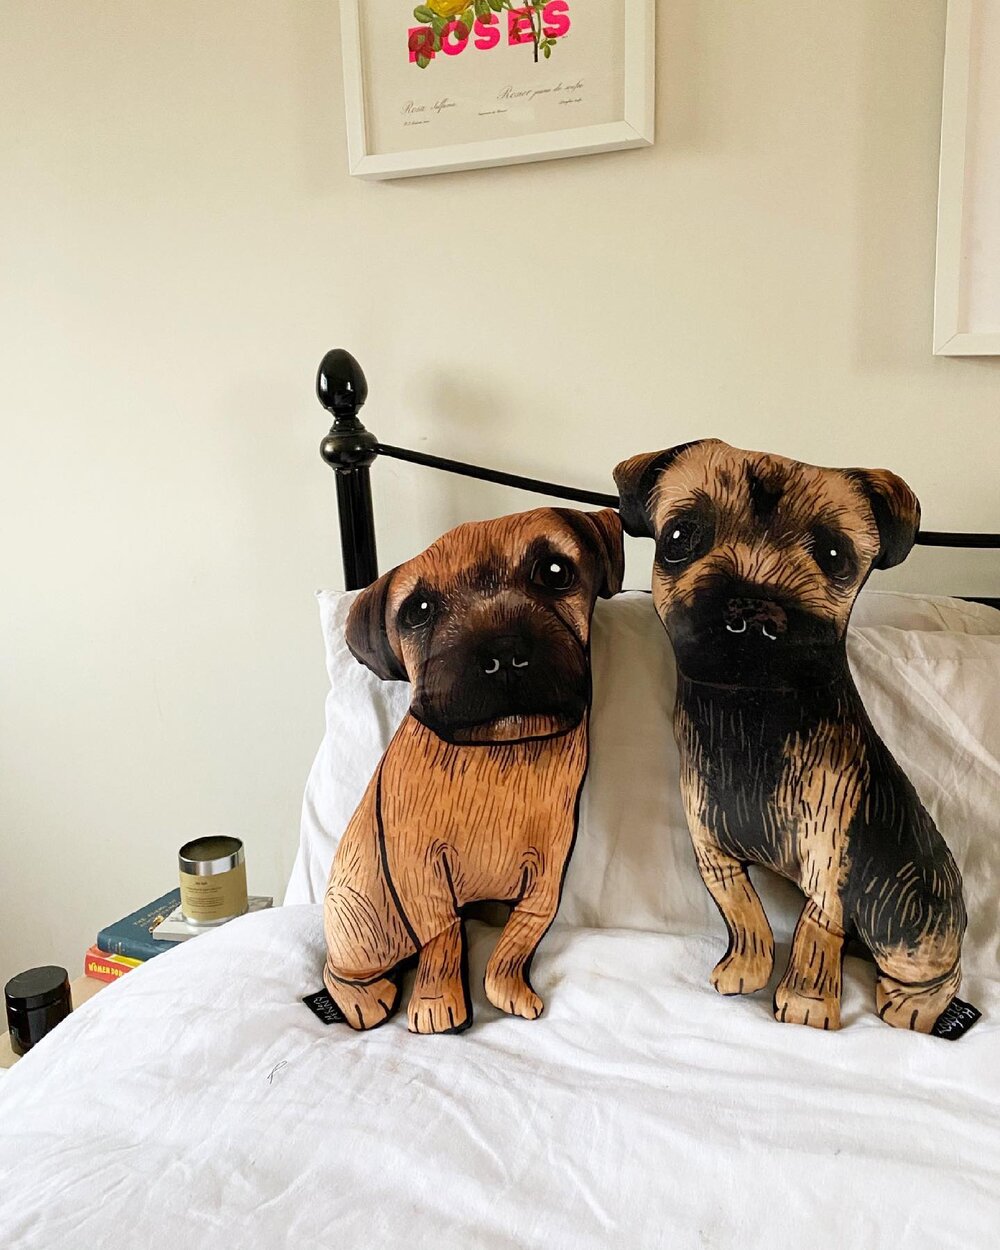 👩🏽&zwj;🤝&zwj;👩🏼 Border terrier babes. 
I love making mirror image pairs + I have space this week for some! Send me a DM if you want your own custom pair 🐩 🐩